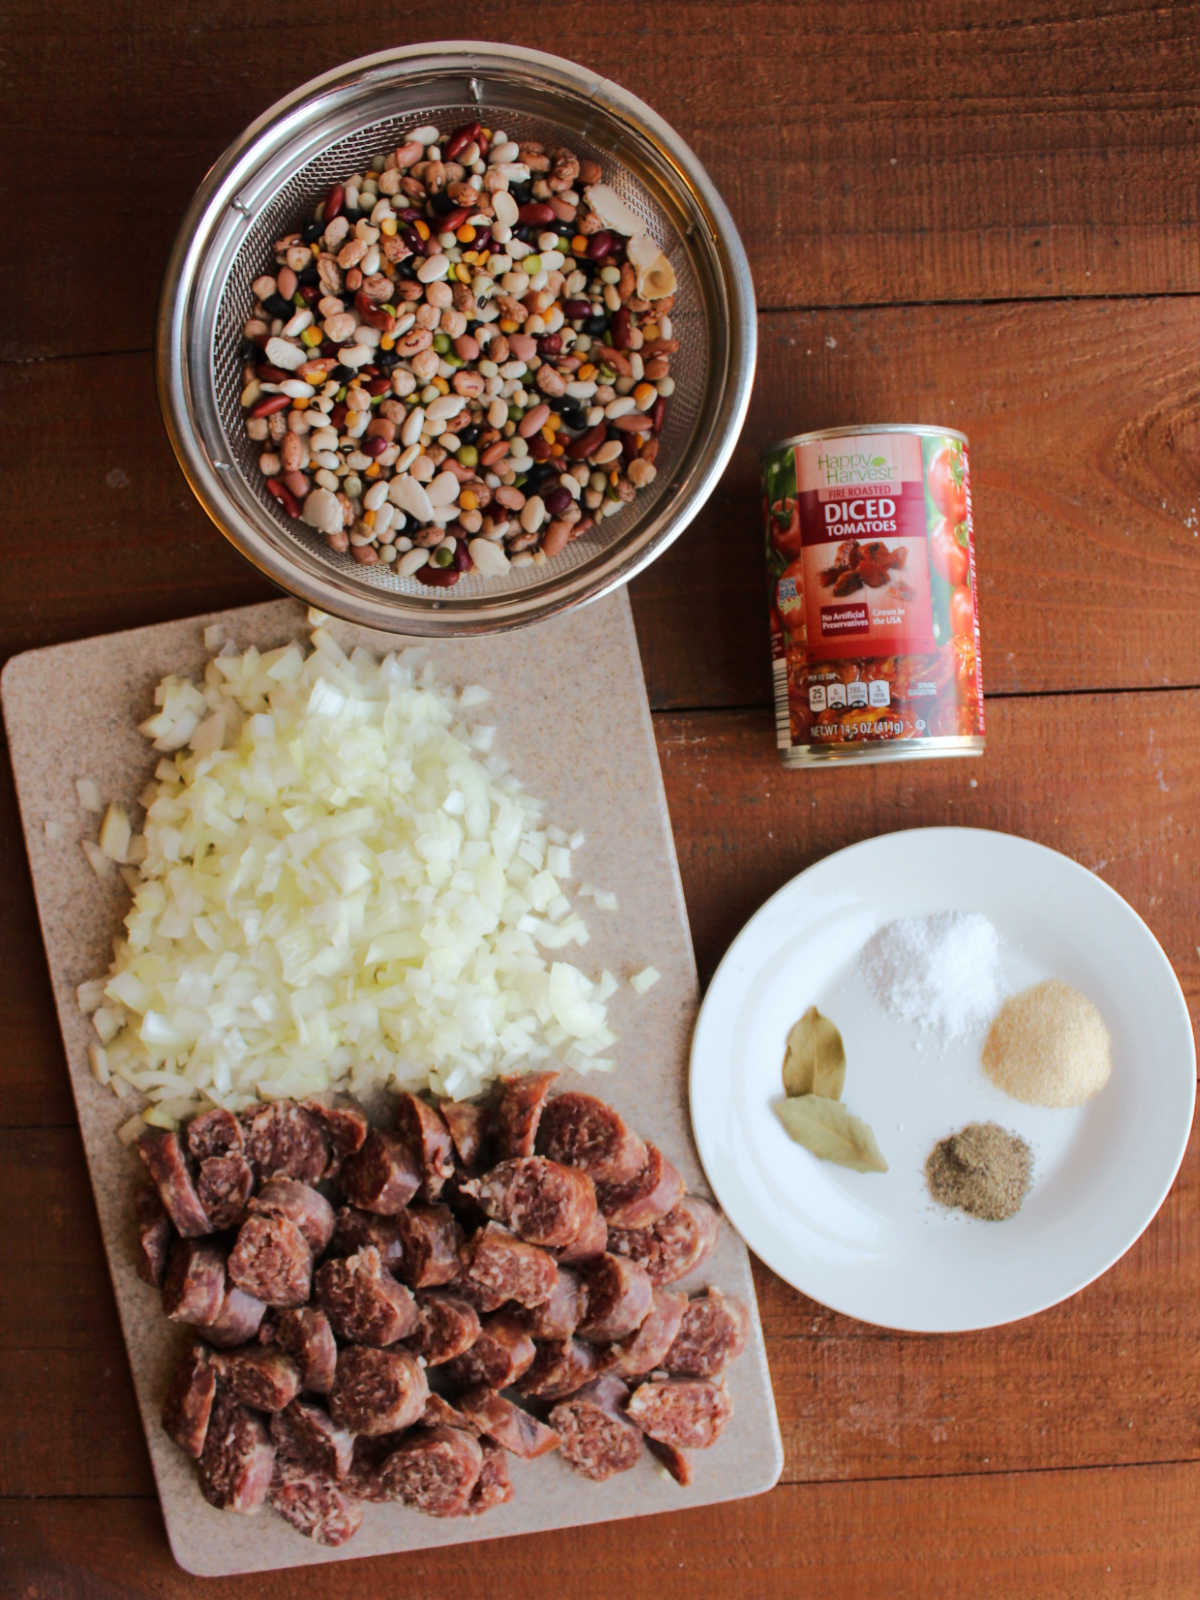 Ingredients including rinsed 16-bean mix, diced onion, sliced smoked sausage, seasonings, and can of fire roasted diced tomatoes ready to be made into Instant Pot bean soup.